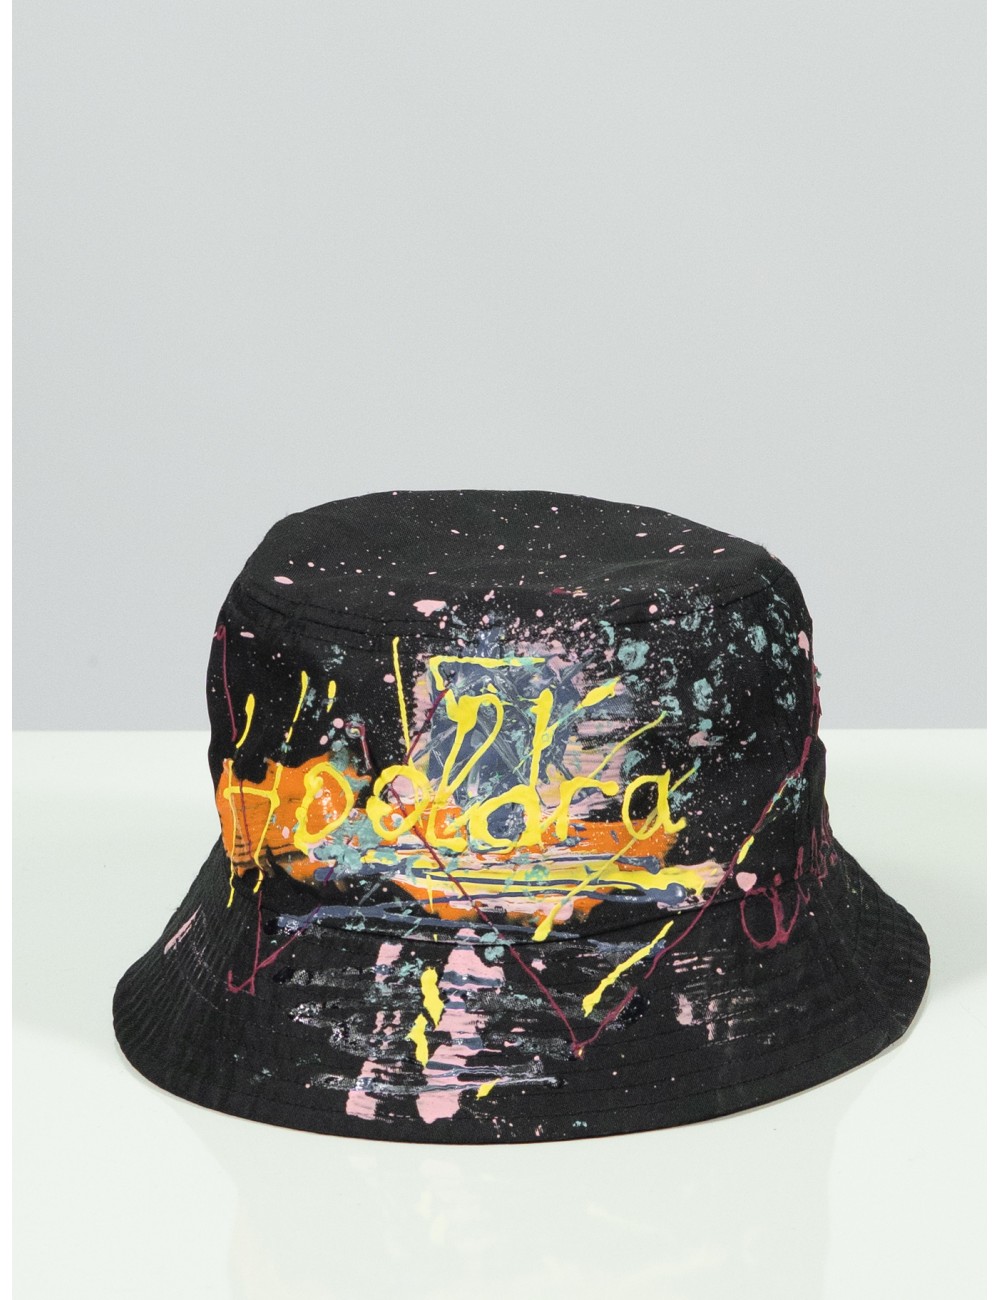 Colorful upcycled bucket hat x Mira